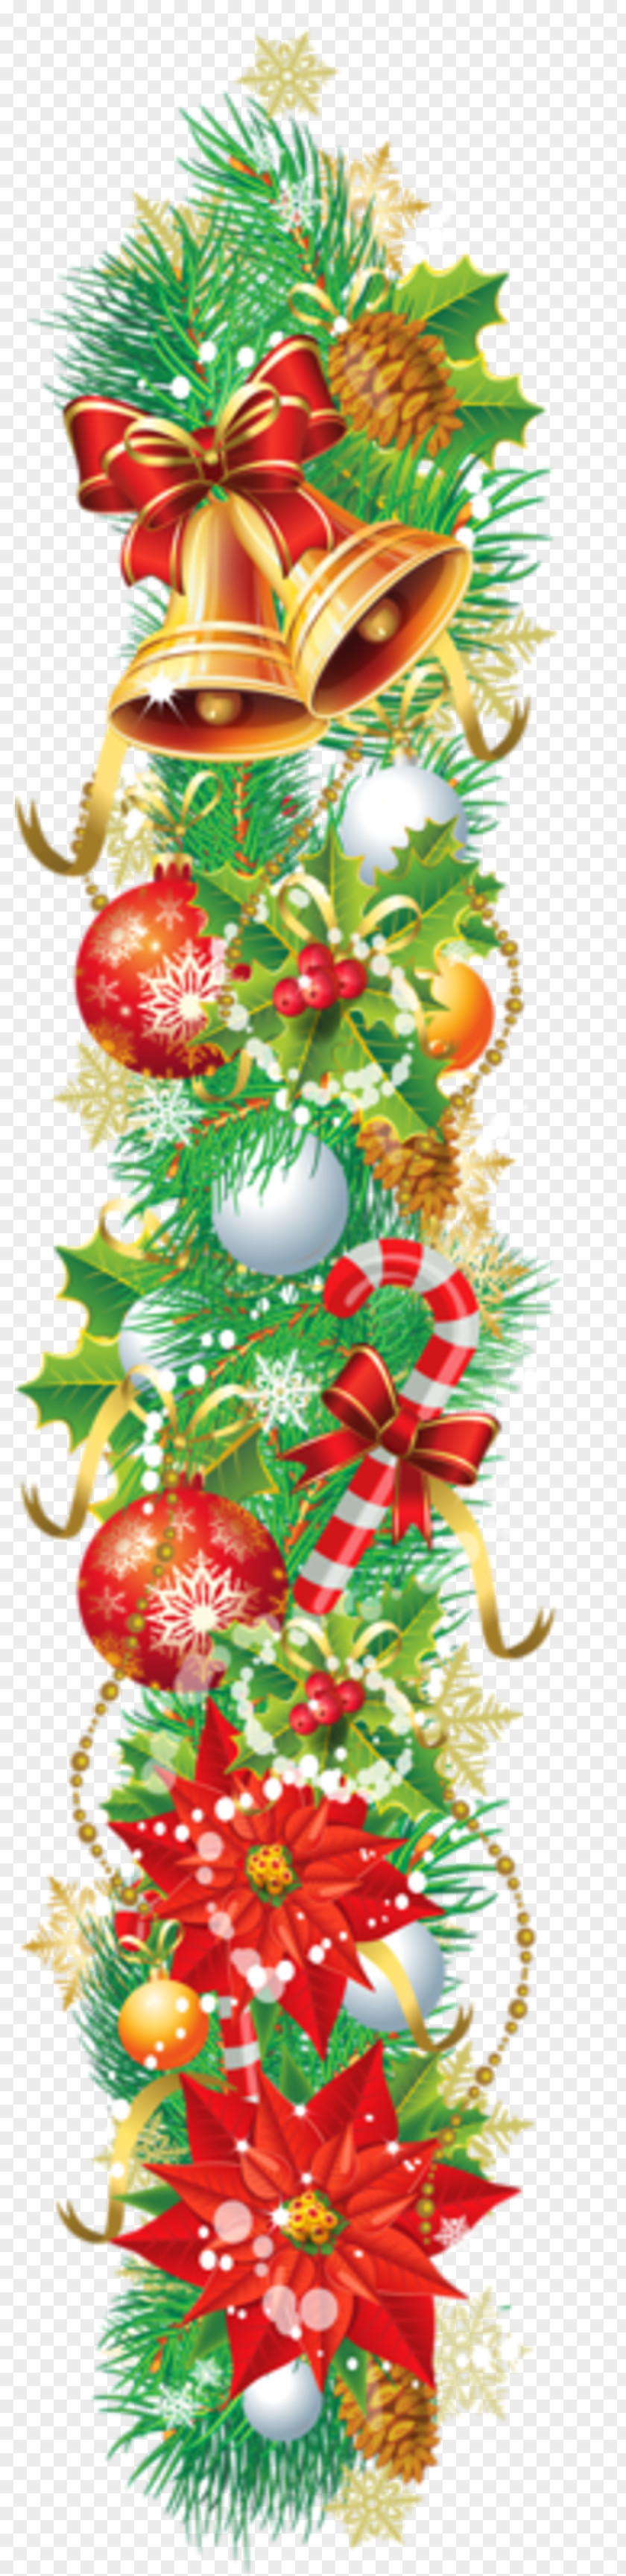 Holiday Supplies Christmas Tree Ornament PNG